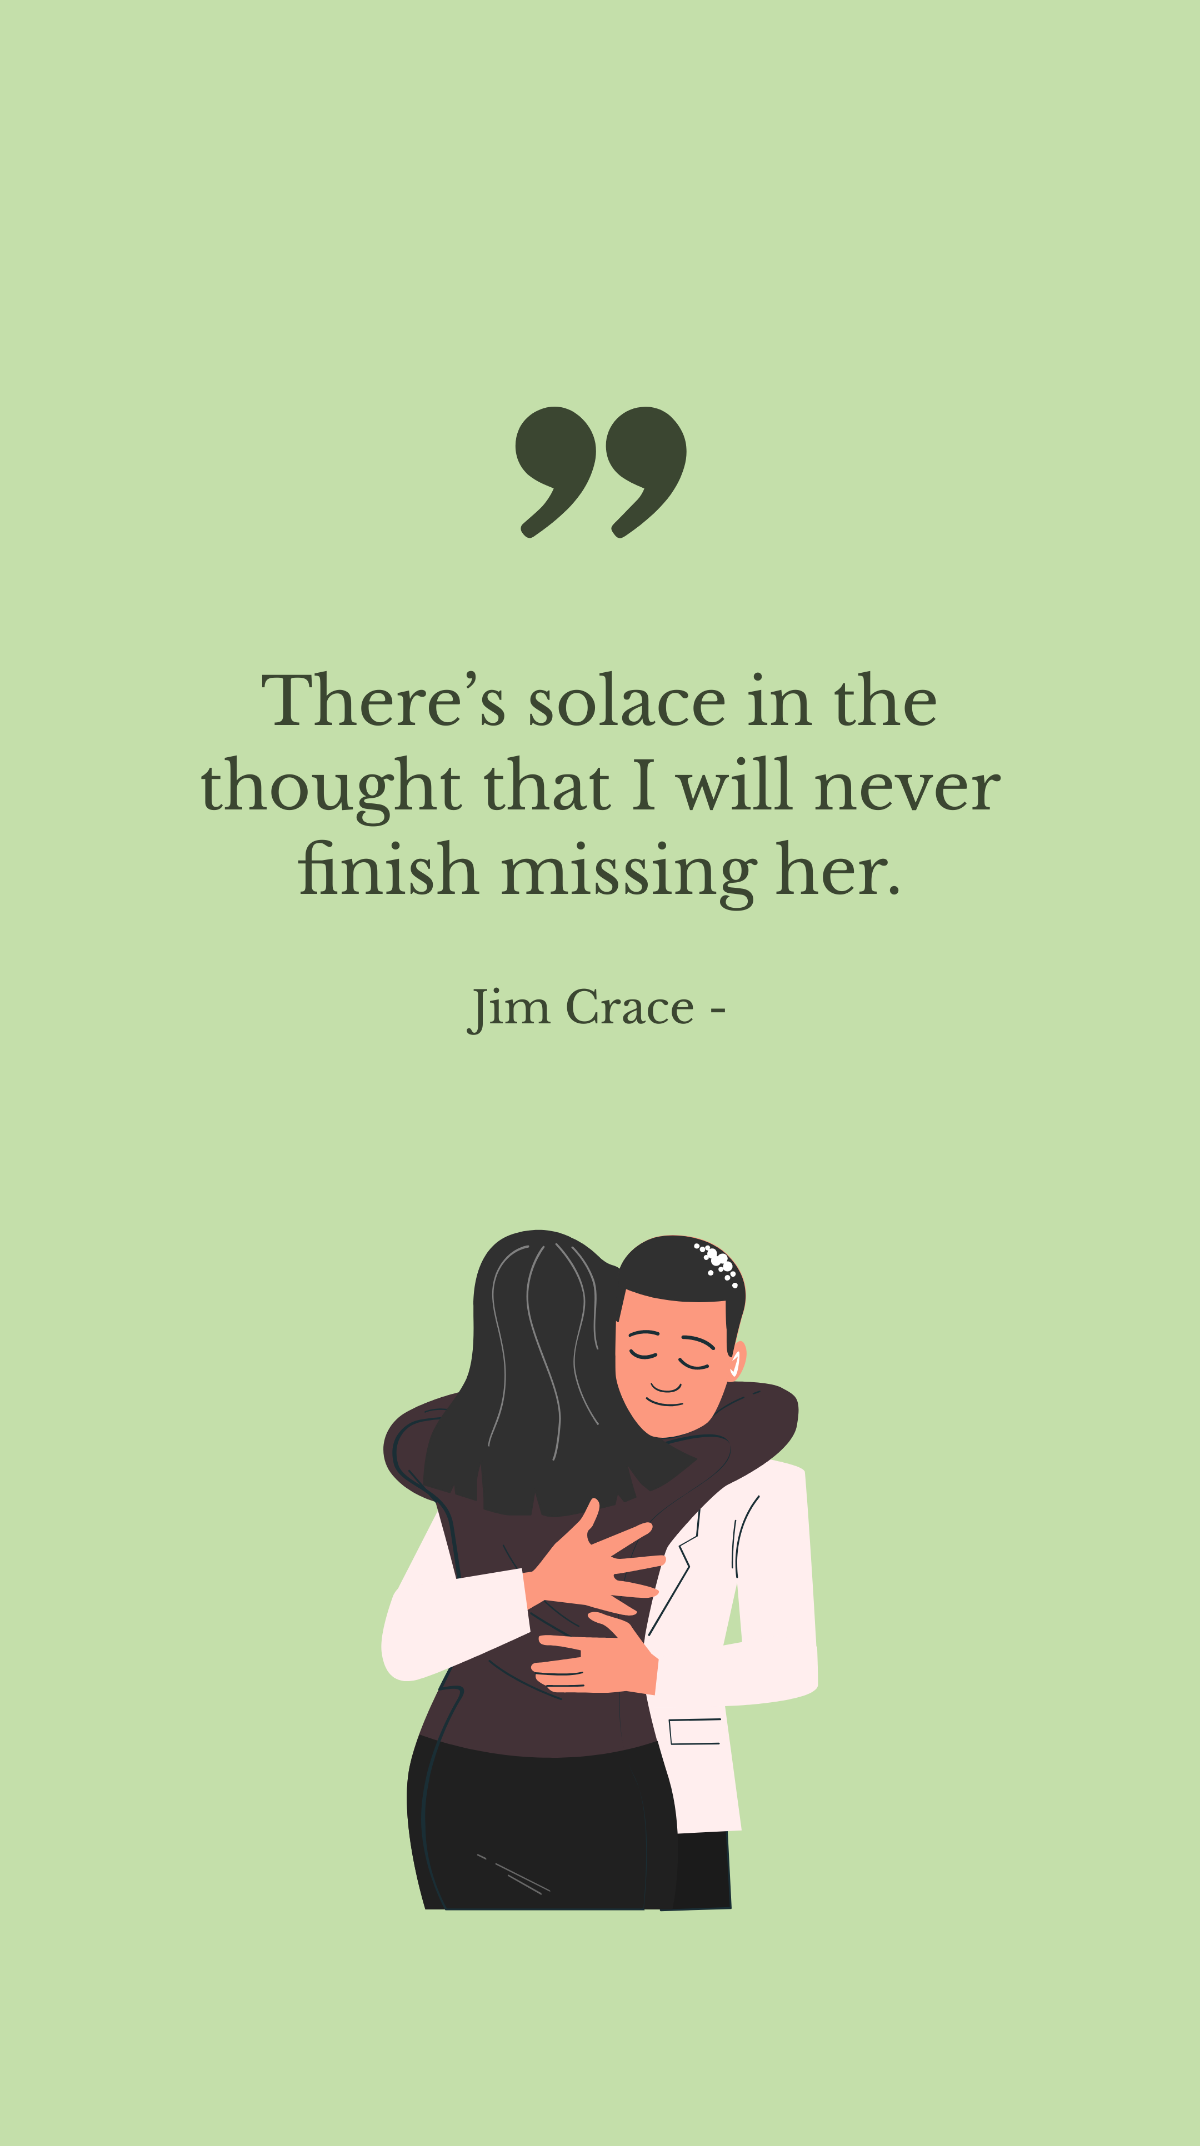 Jim Crace - There’s solace in the thought that I will never finish missing her. Template